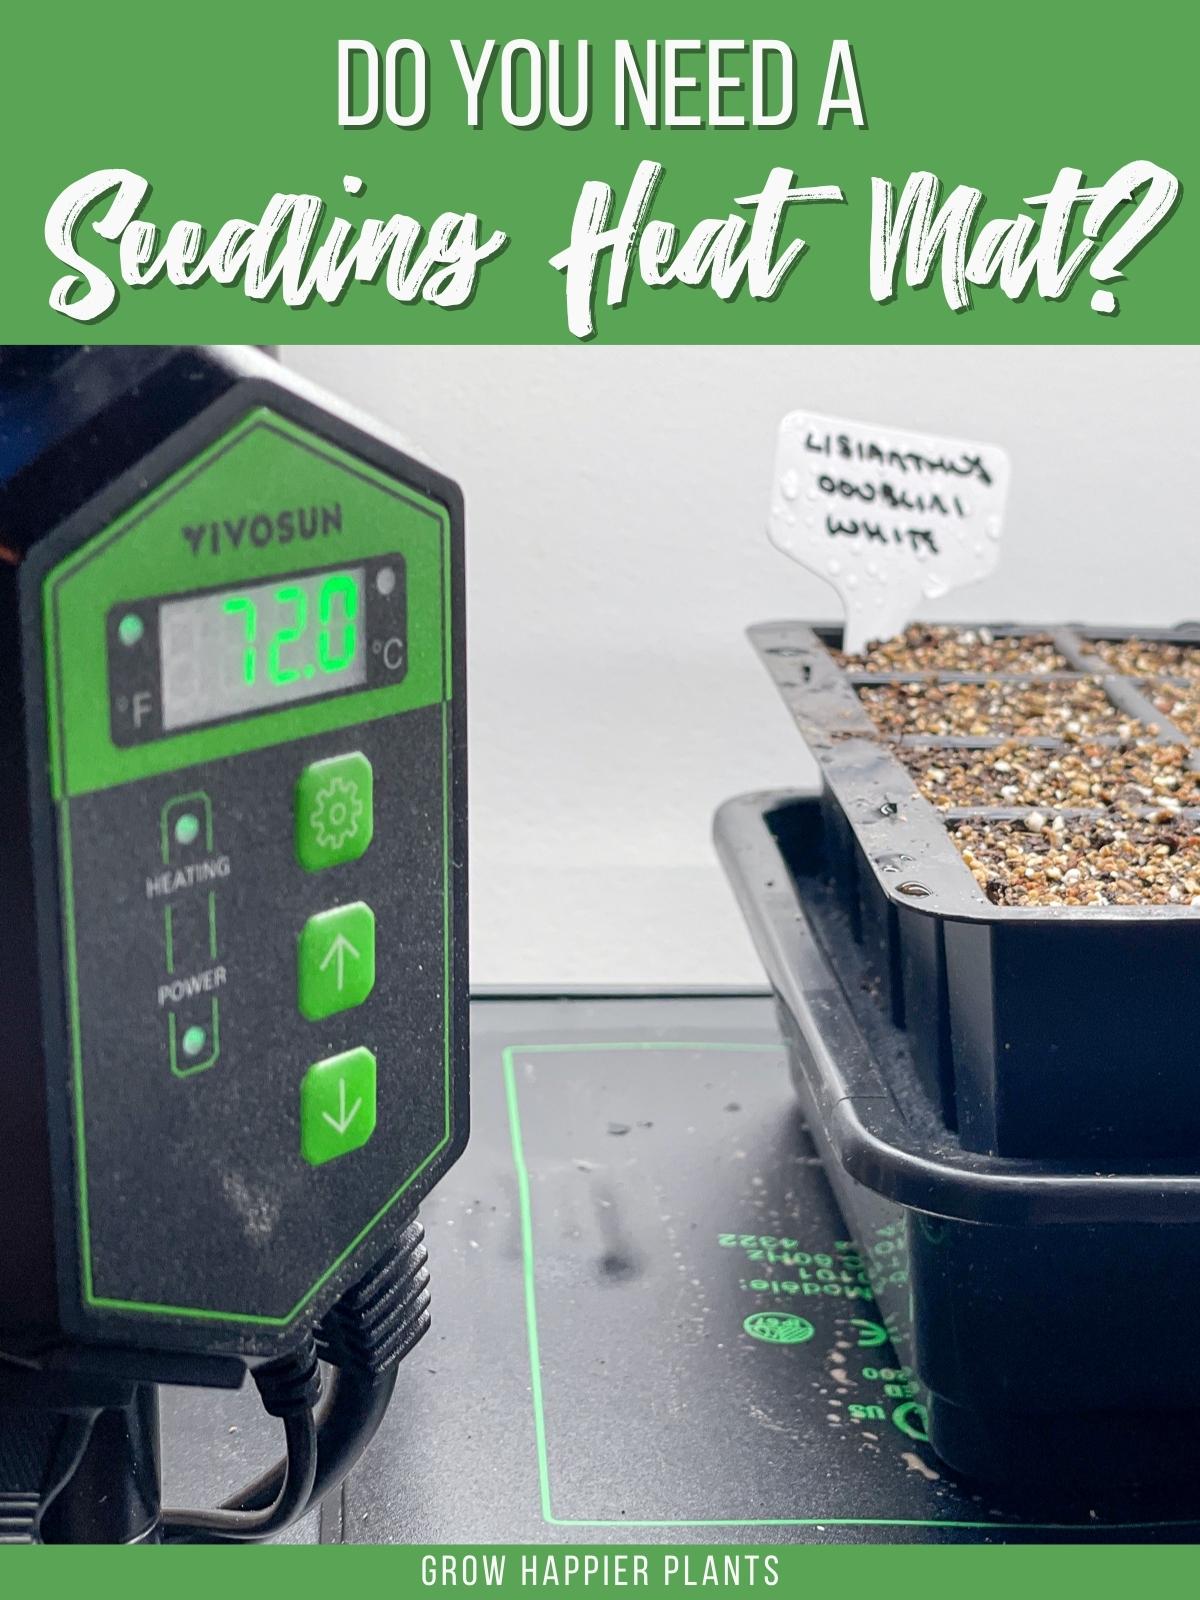 do you need a seedling heat mat? text overlay on image of Vivosun heat mat with thermostat set to 72 degrees